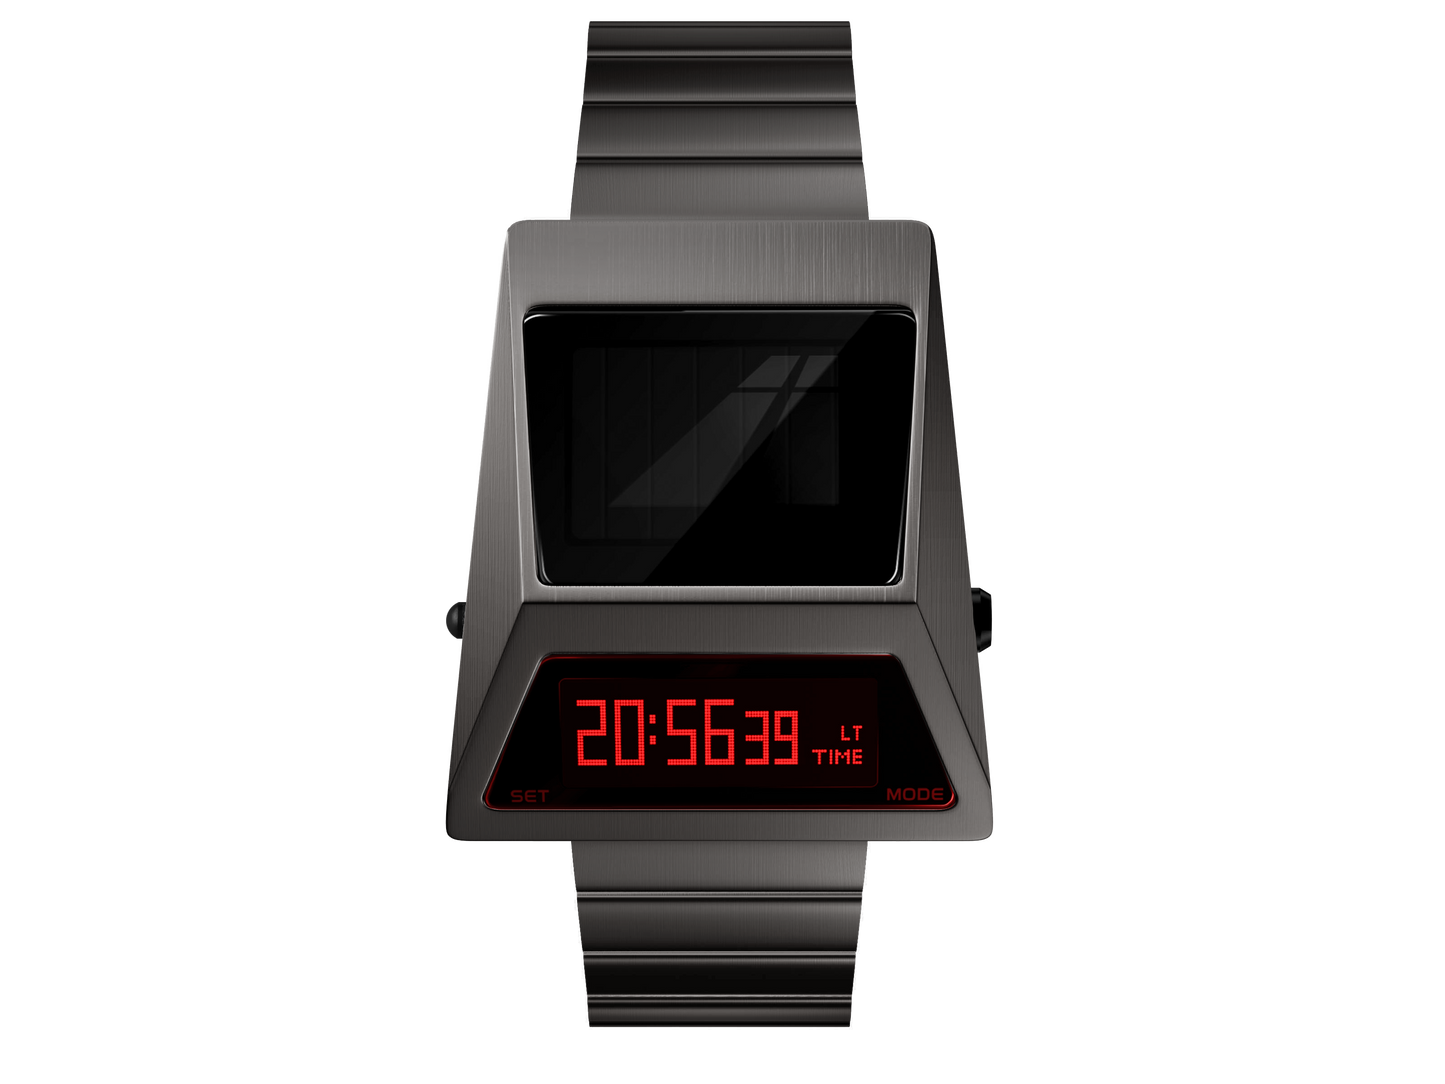 solar-powered-cyber-watches-s3000Ga-R-top view